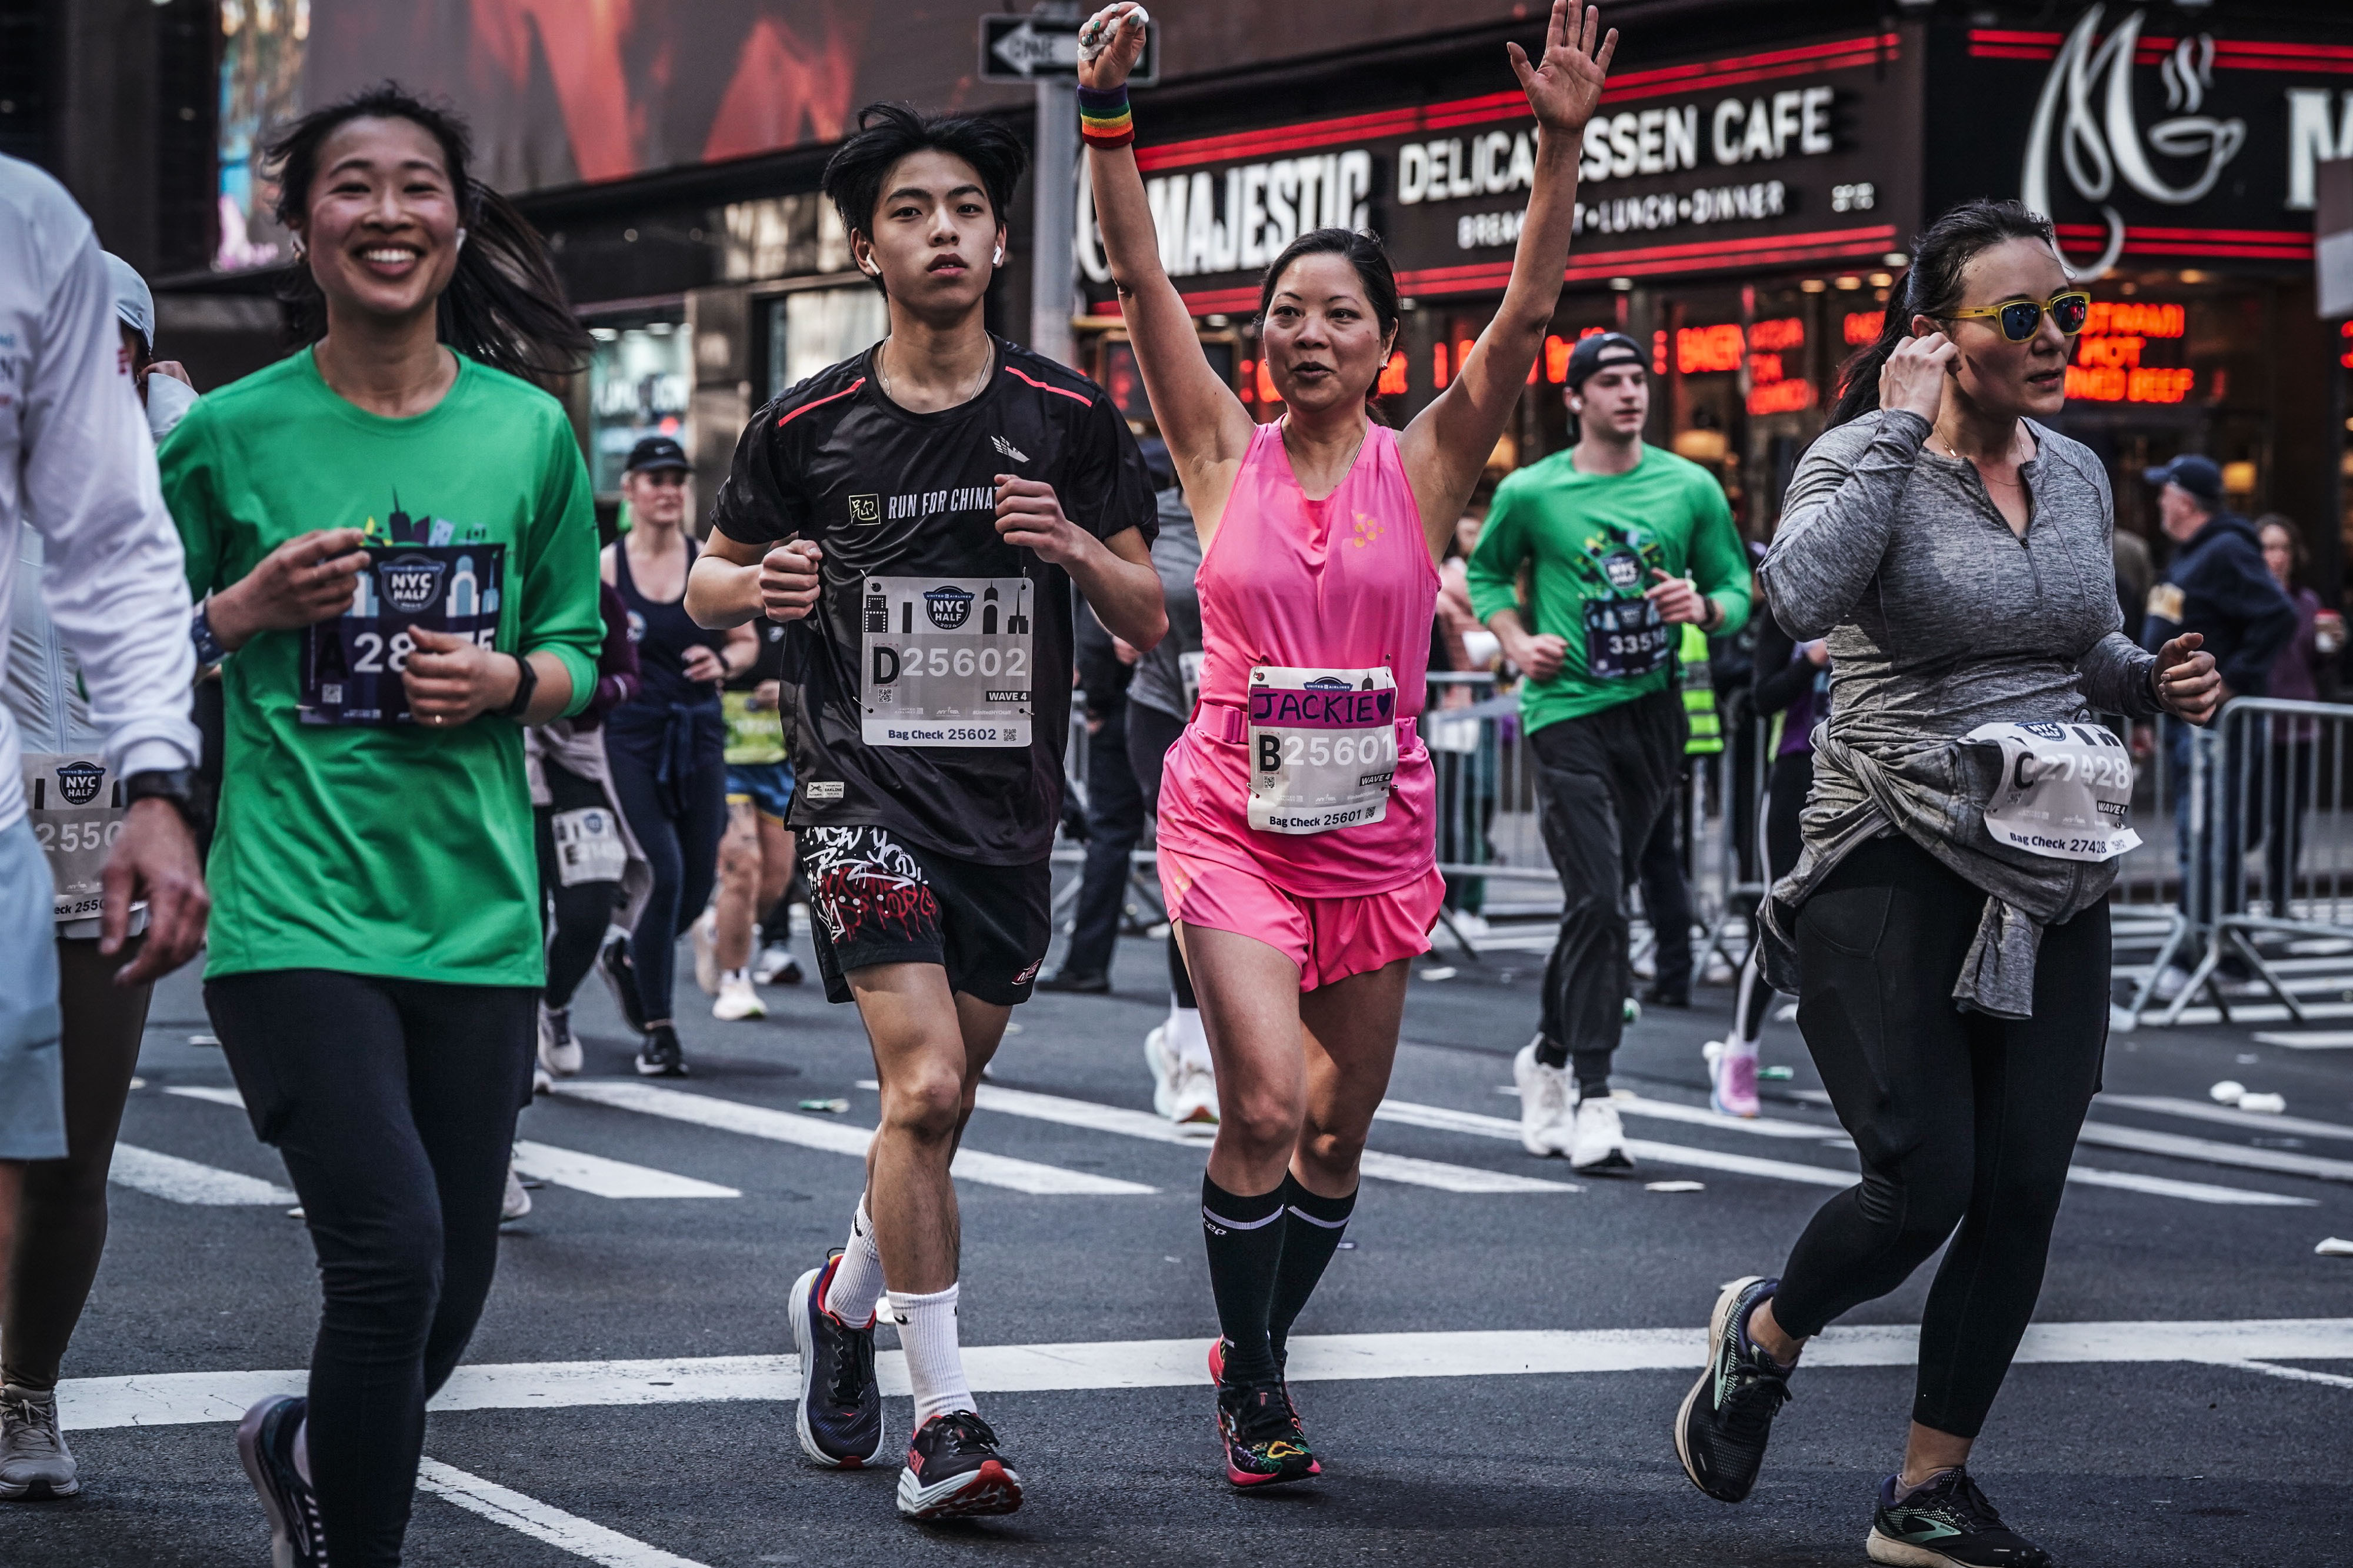 Jackie Quan running the United Airlines NYC Half